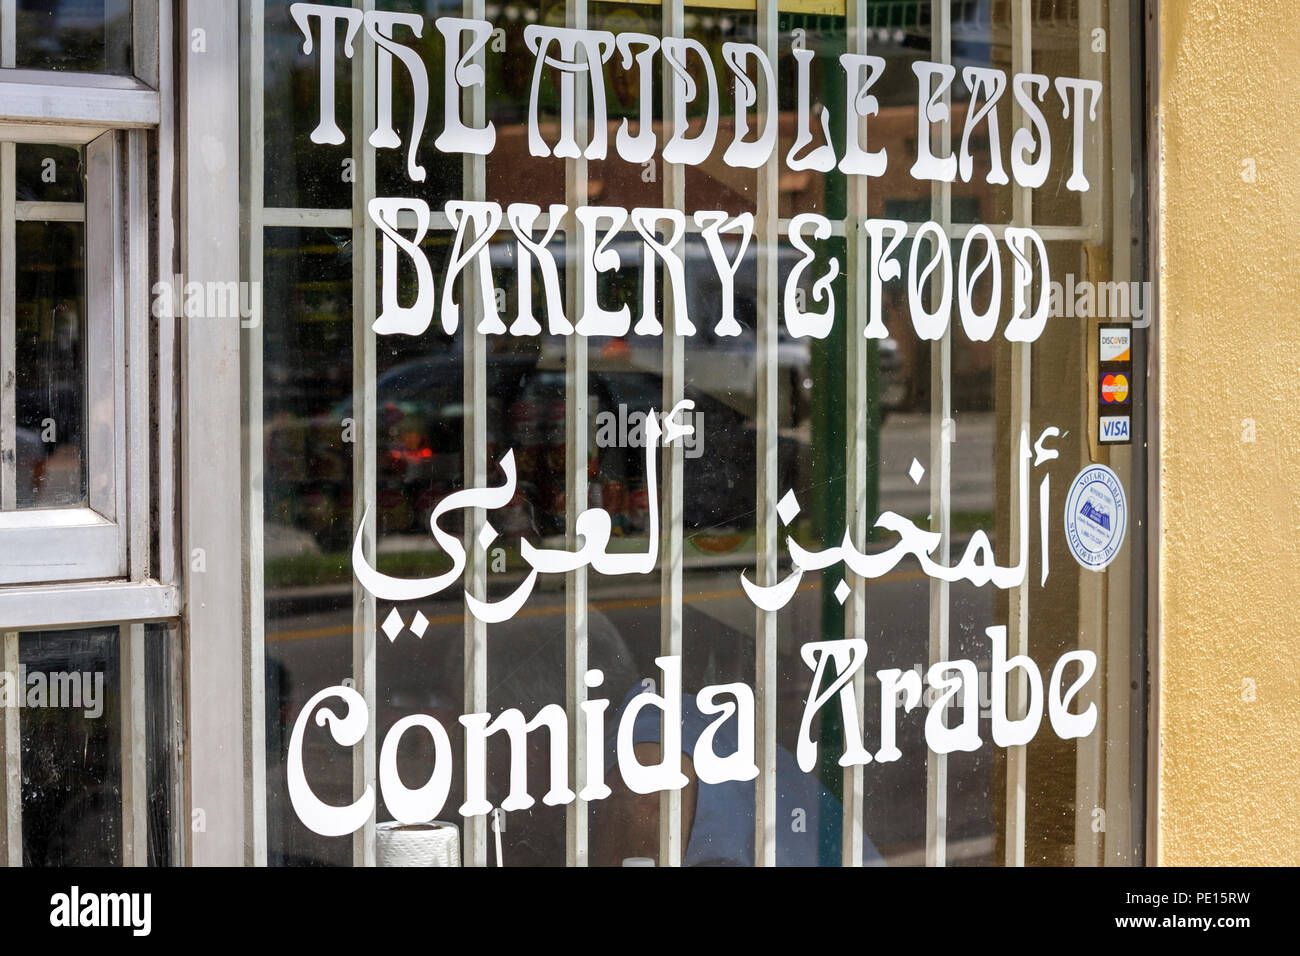 Miami Florida,Coral Gables,Coral Way,store window,sign,bilingual,Spanish language,bilingual food,Middle East Bakery,small business,Arabic,FL080410019 Stock Photo